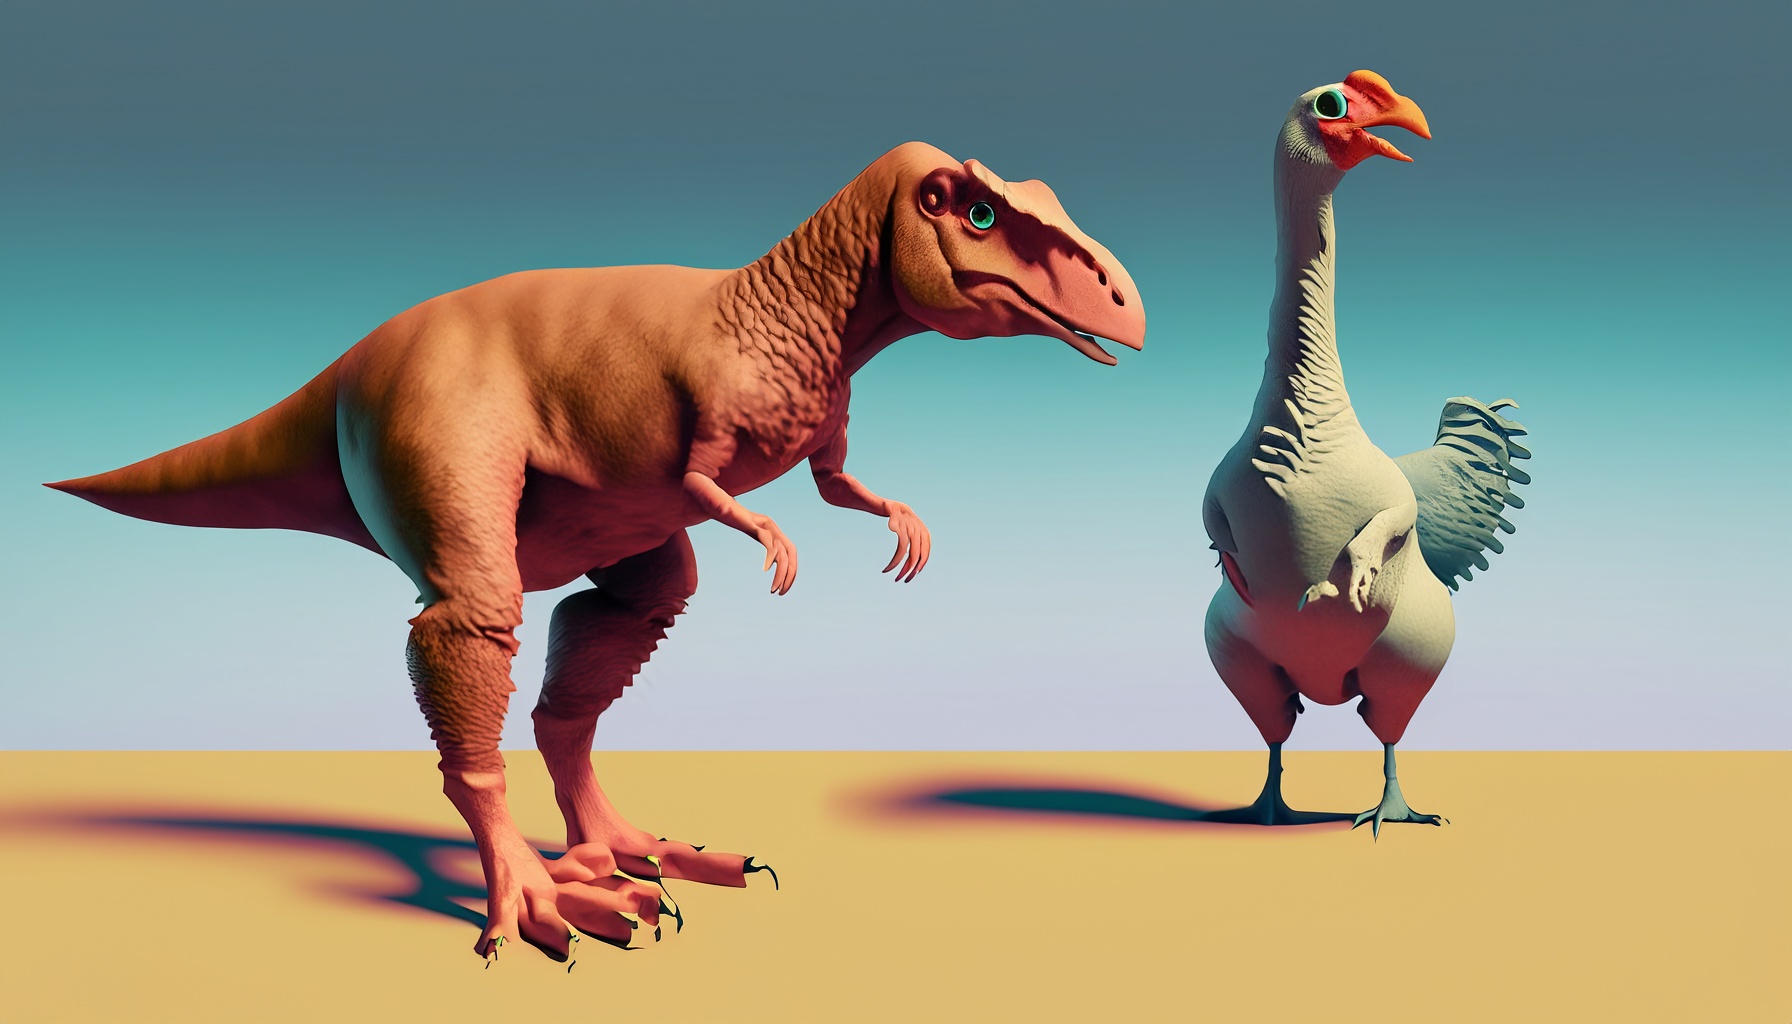 Chickens are the closest living relatives of the Tyrannosaurus rex